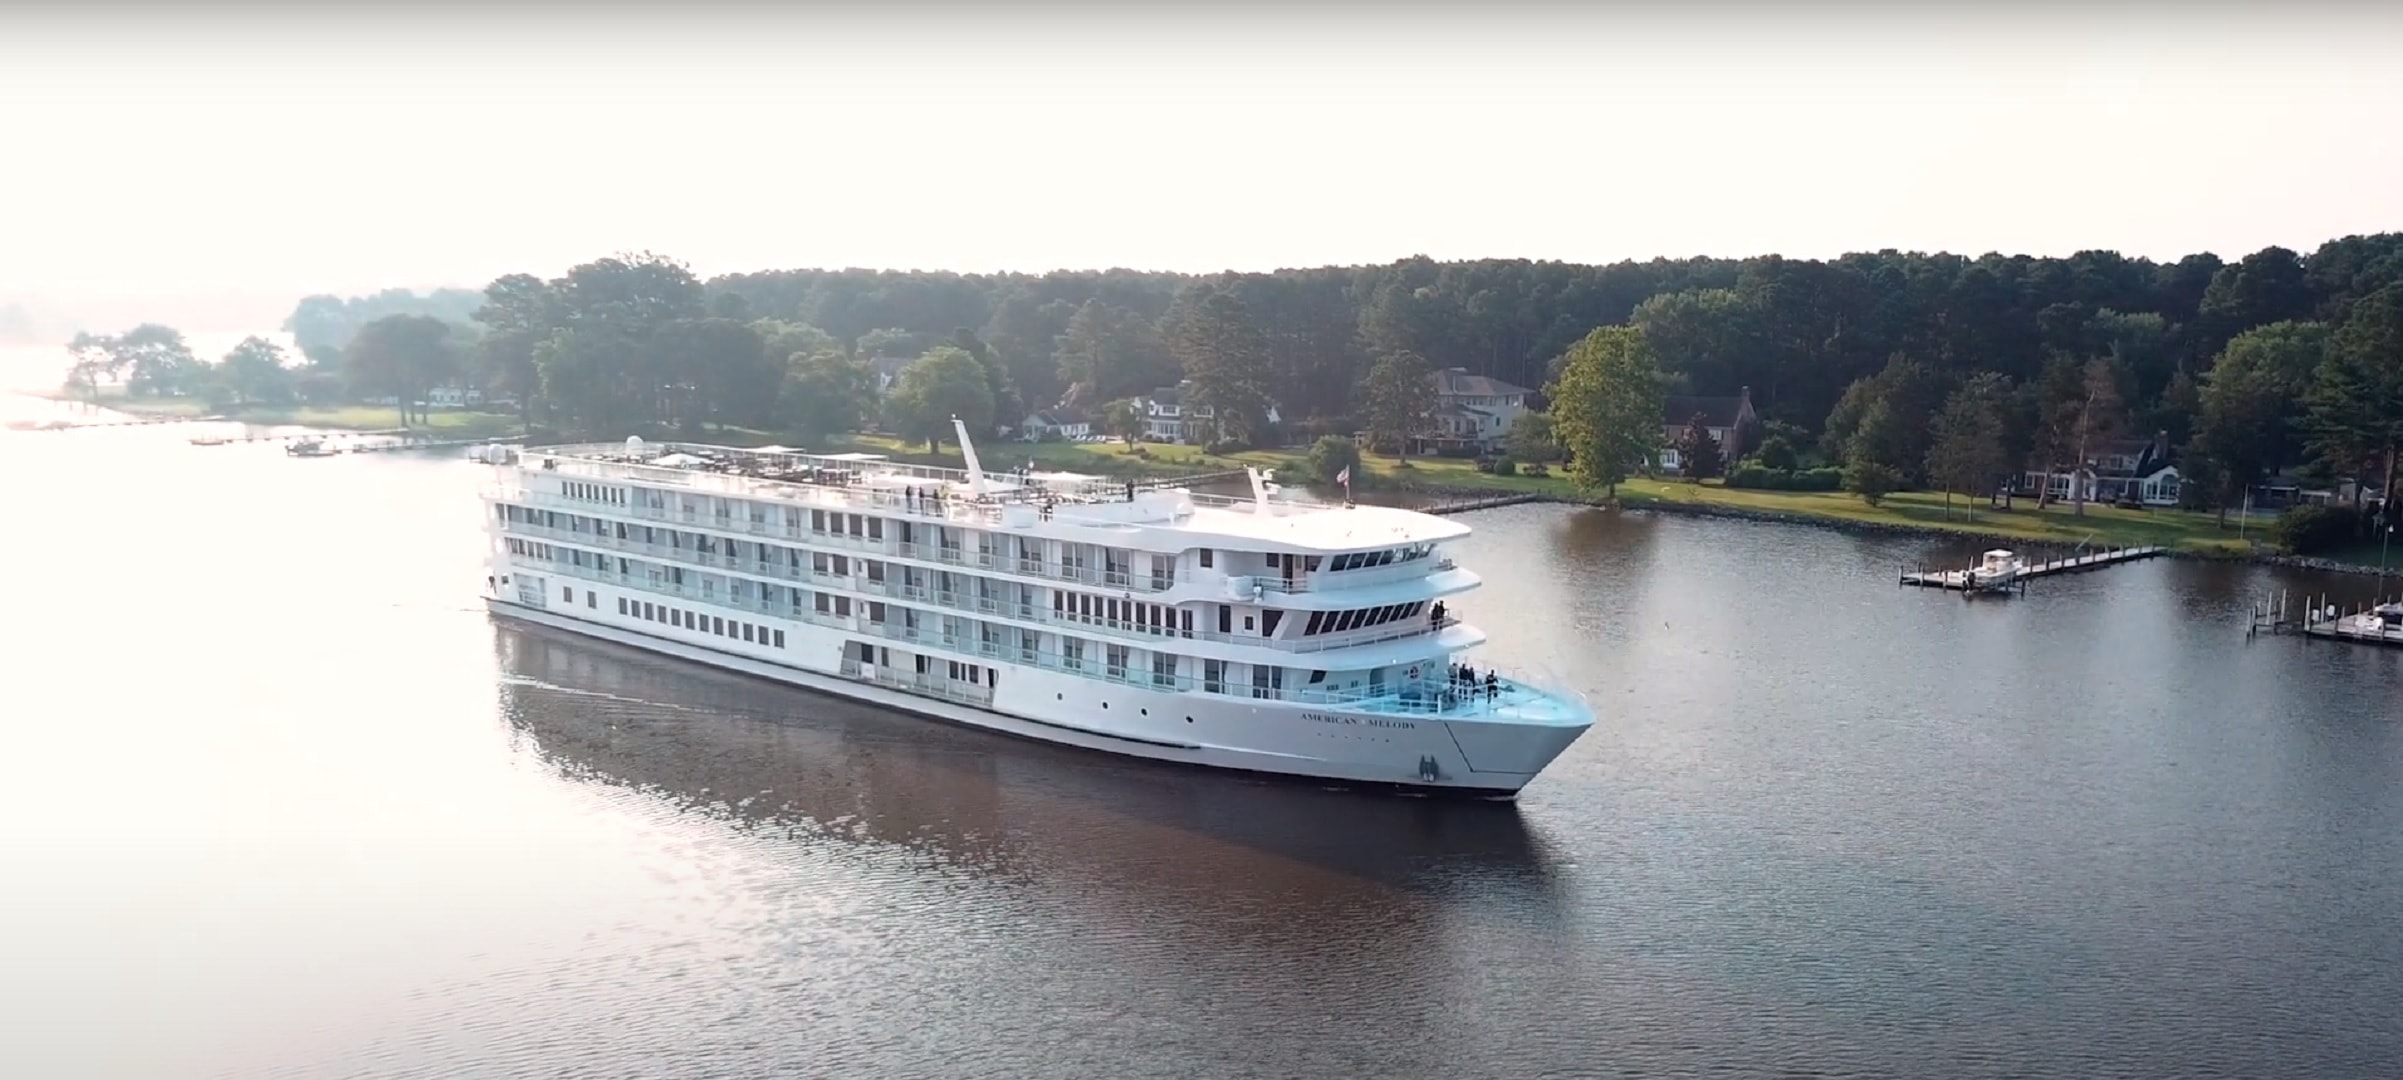 American Cruise Lines Kicks Off Its Longest River Cruise So Far, on Its